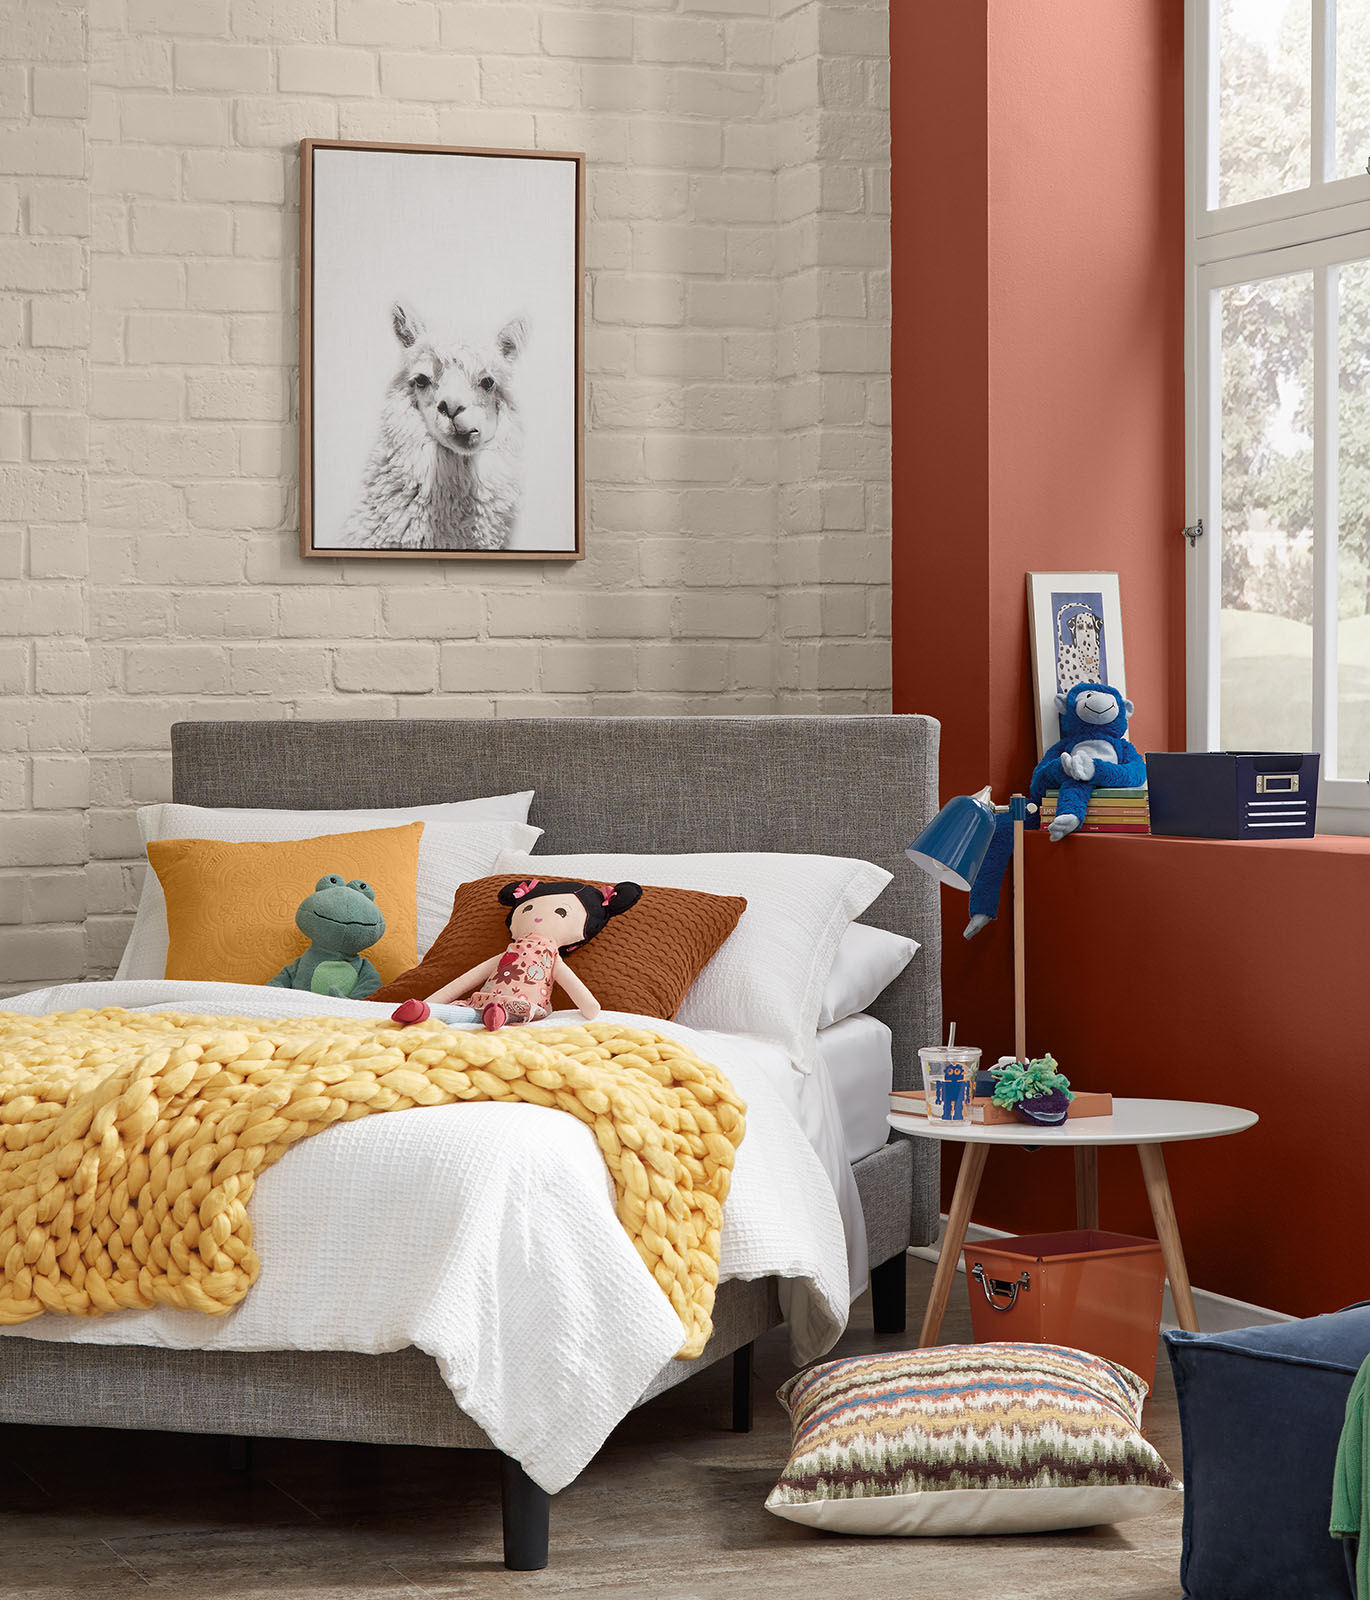 A child's bedroom with cream colored painted brick walls. The accent wall in painted in a dark orange color. The feeling of the room is cheerful.